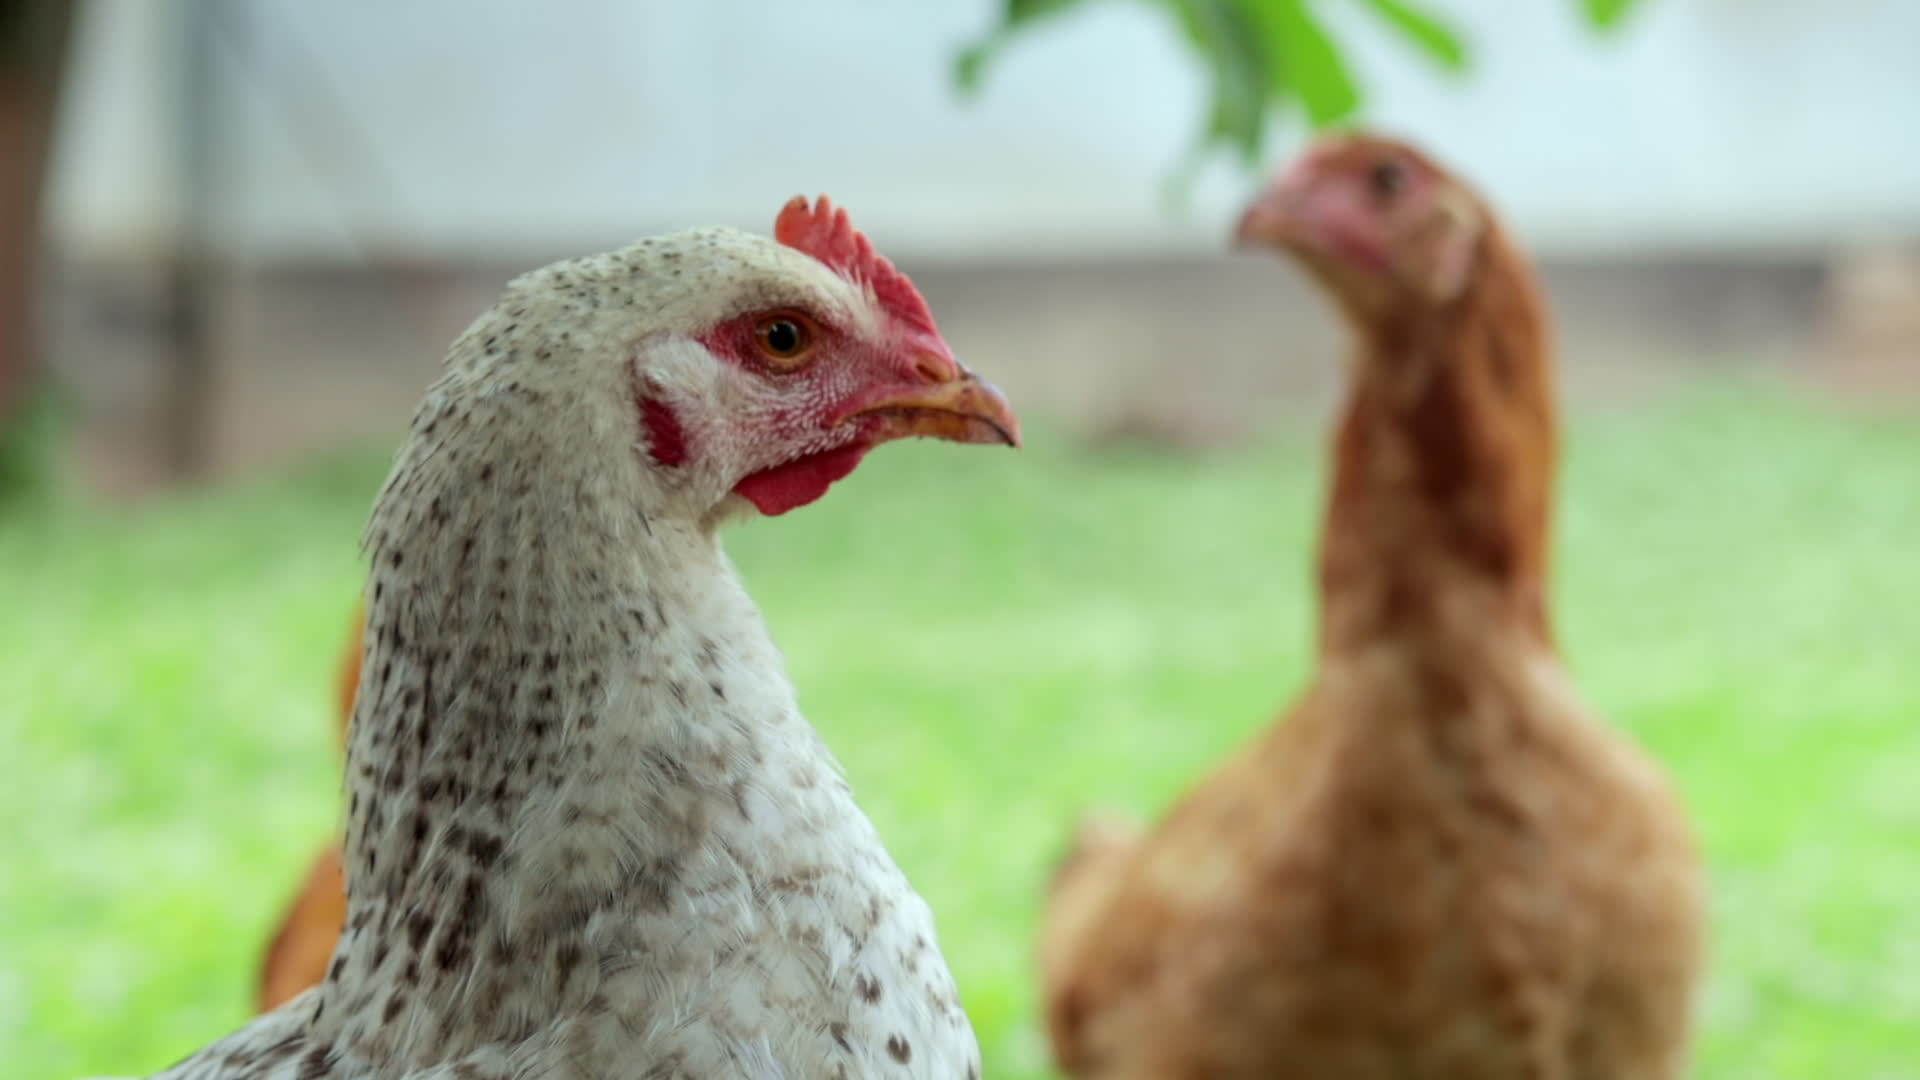 Chickens on the farm, poultry concept. White and red chicken outdoors. Funny  birds on a bio farm. Domestic birds on a free range farm. Breeding chickens.  Walk in the yard. Agricultural industry.